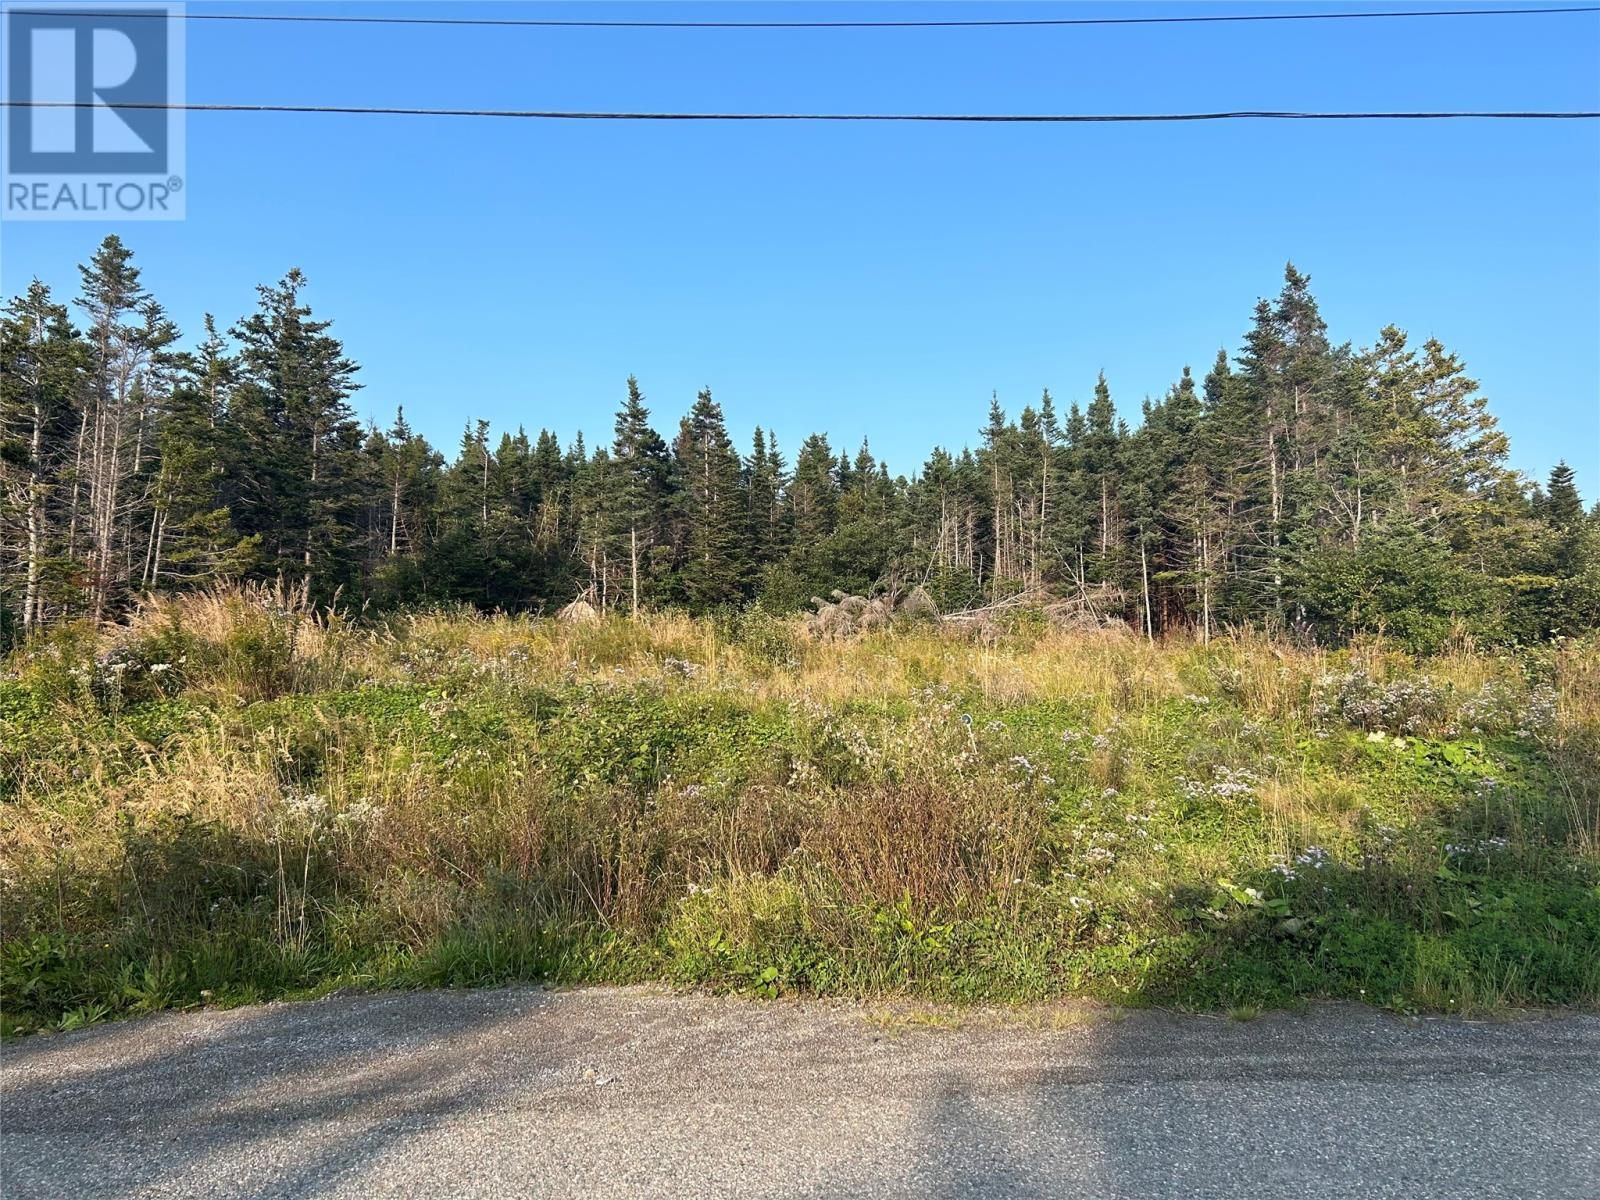 Main Photo: 135-137 Lower Cove Road in McIvers: Vacant Land for sale : MLS®# 1263819